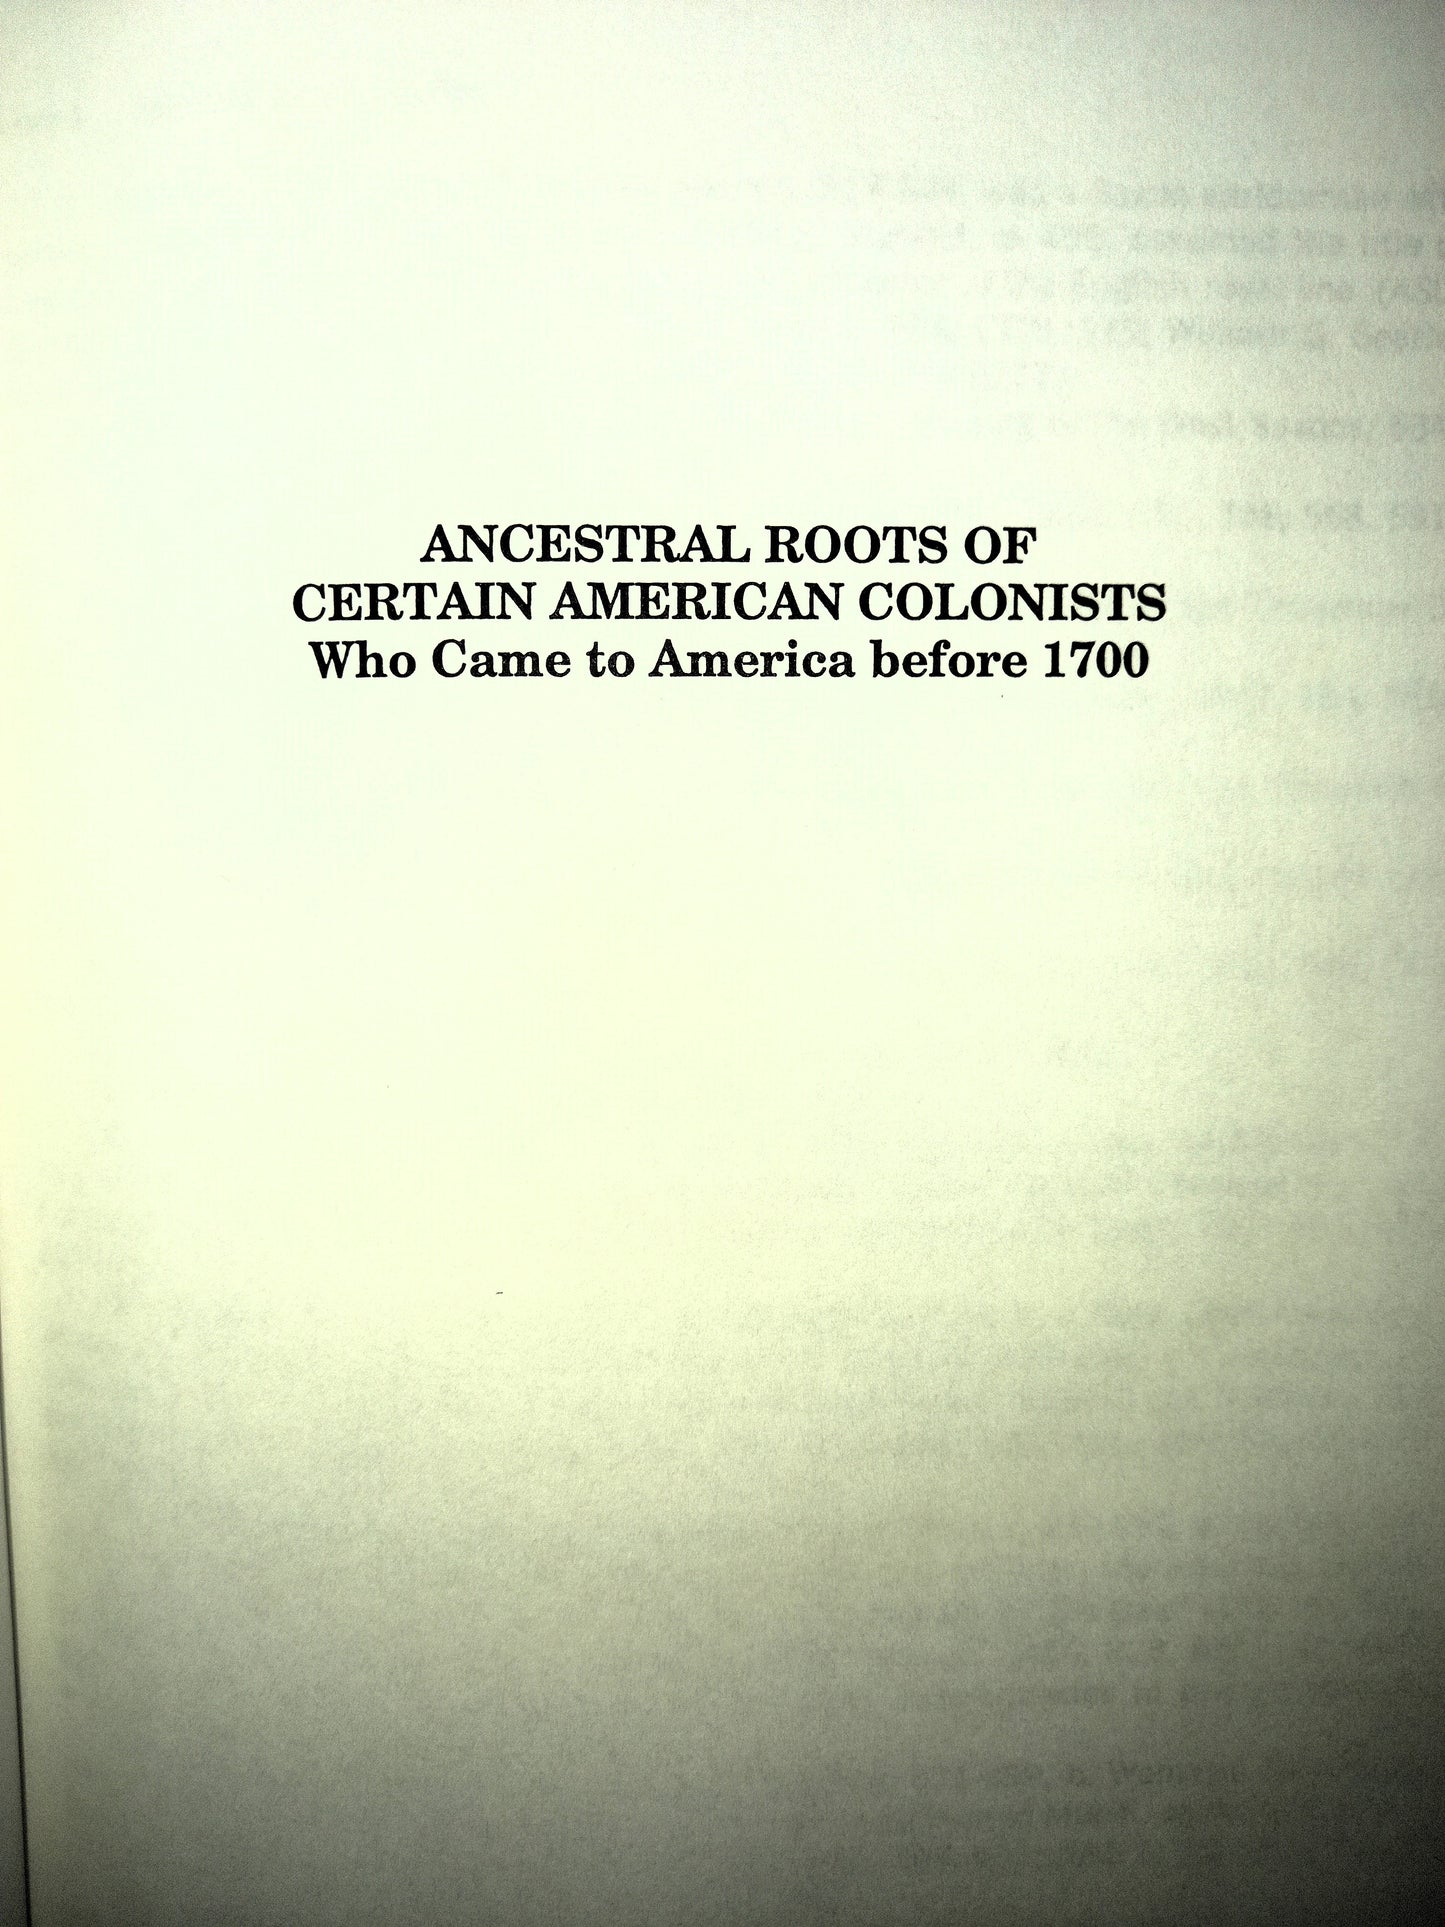 Ancestral Roots of Certain American Colonists Who Came to America before 1700 (Eighth Edition)